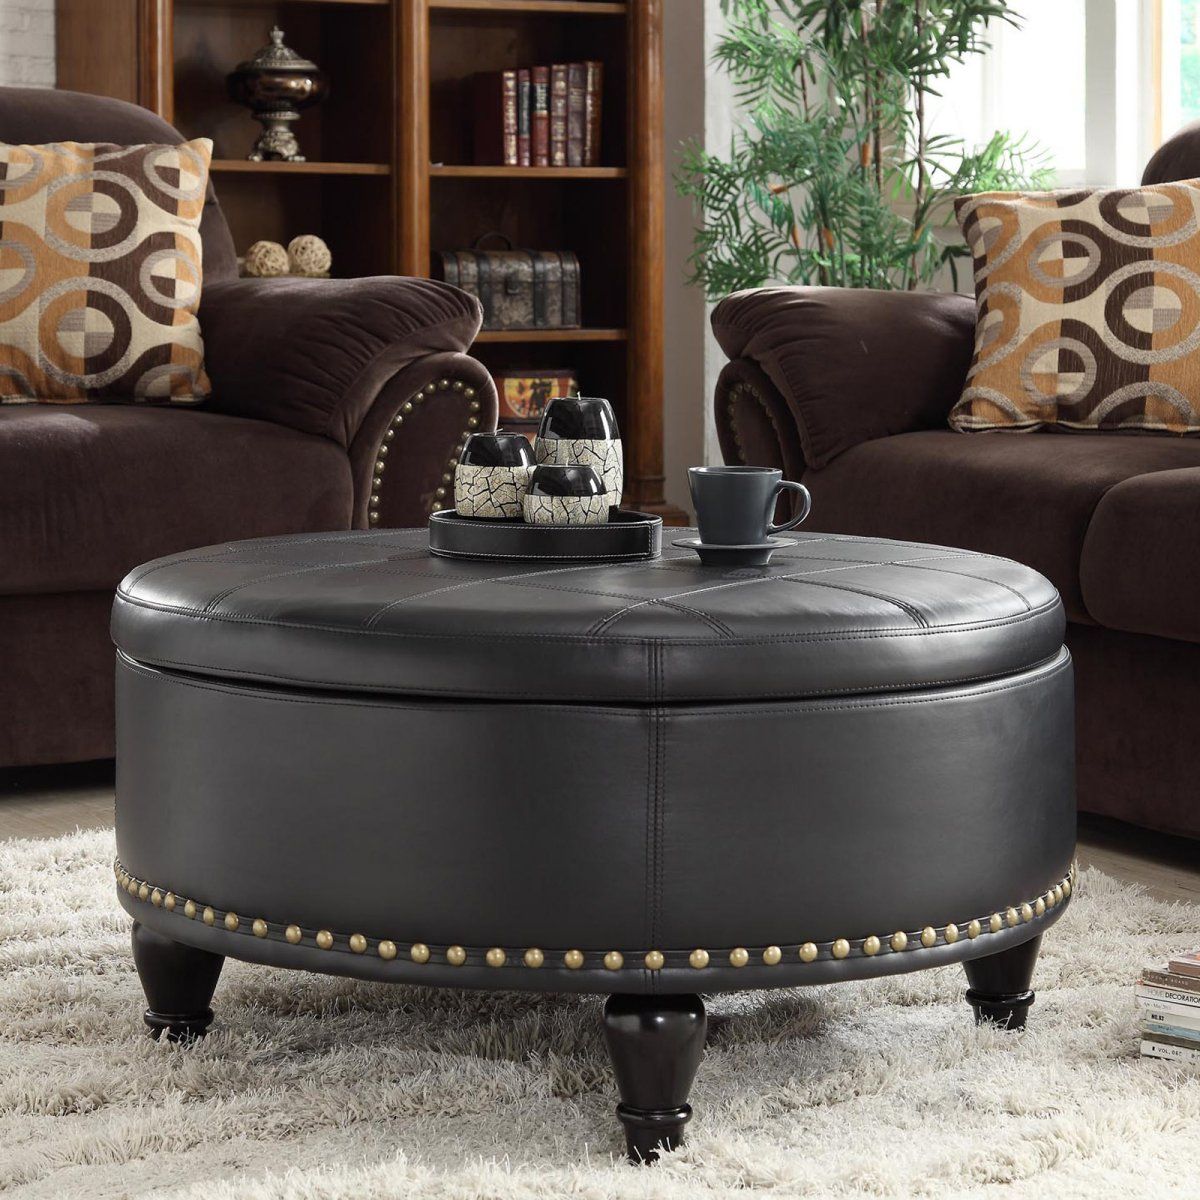 Unique And Creative! Tufted Leather Ottoman Coffee Table – Homesfeed In Black Faux Leather Tufted Ottomans (View 20 of 20)